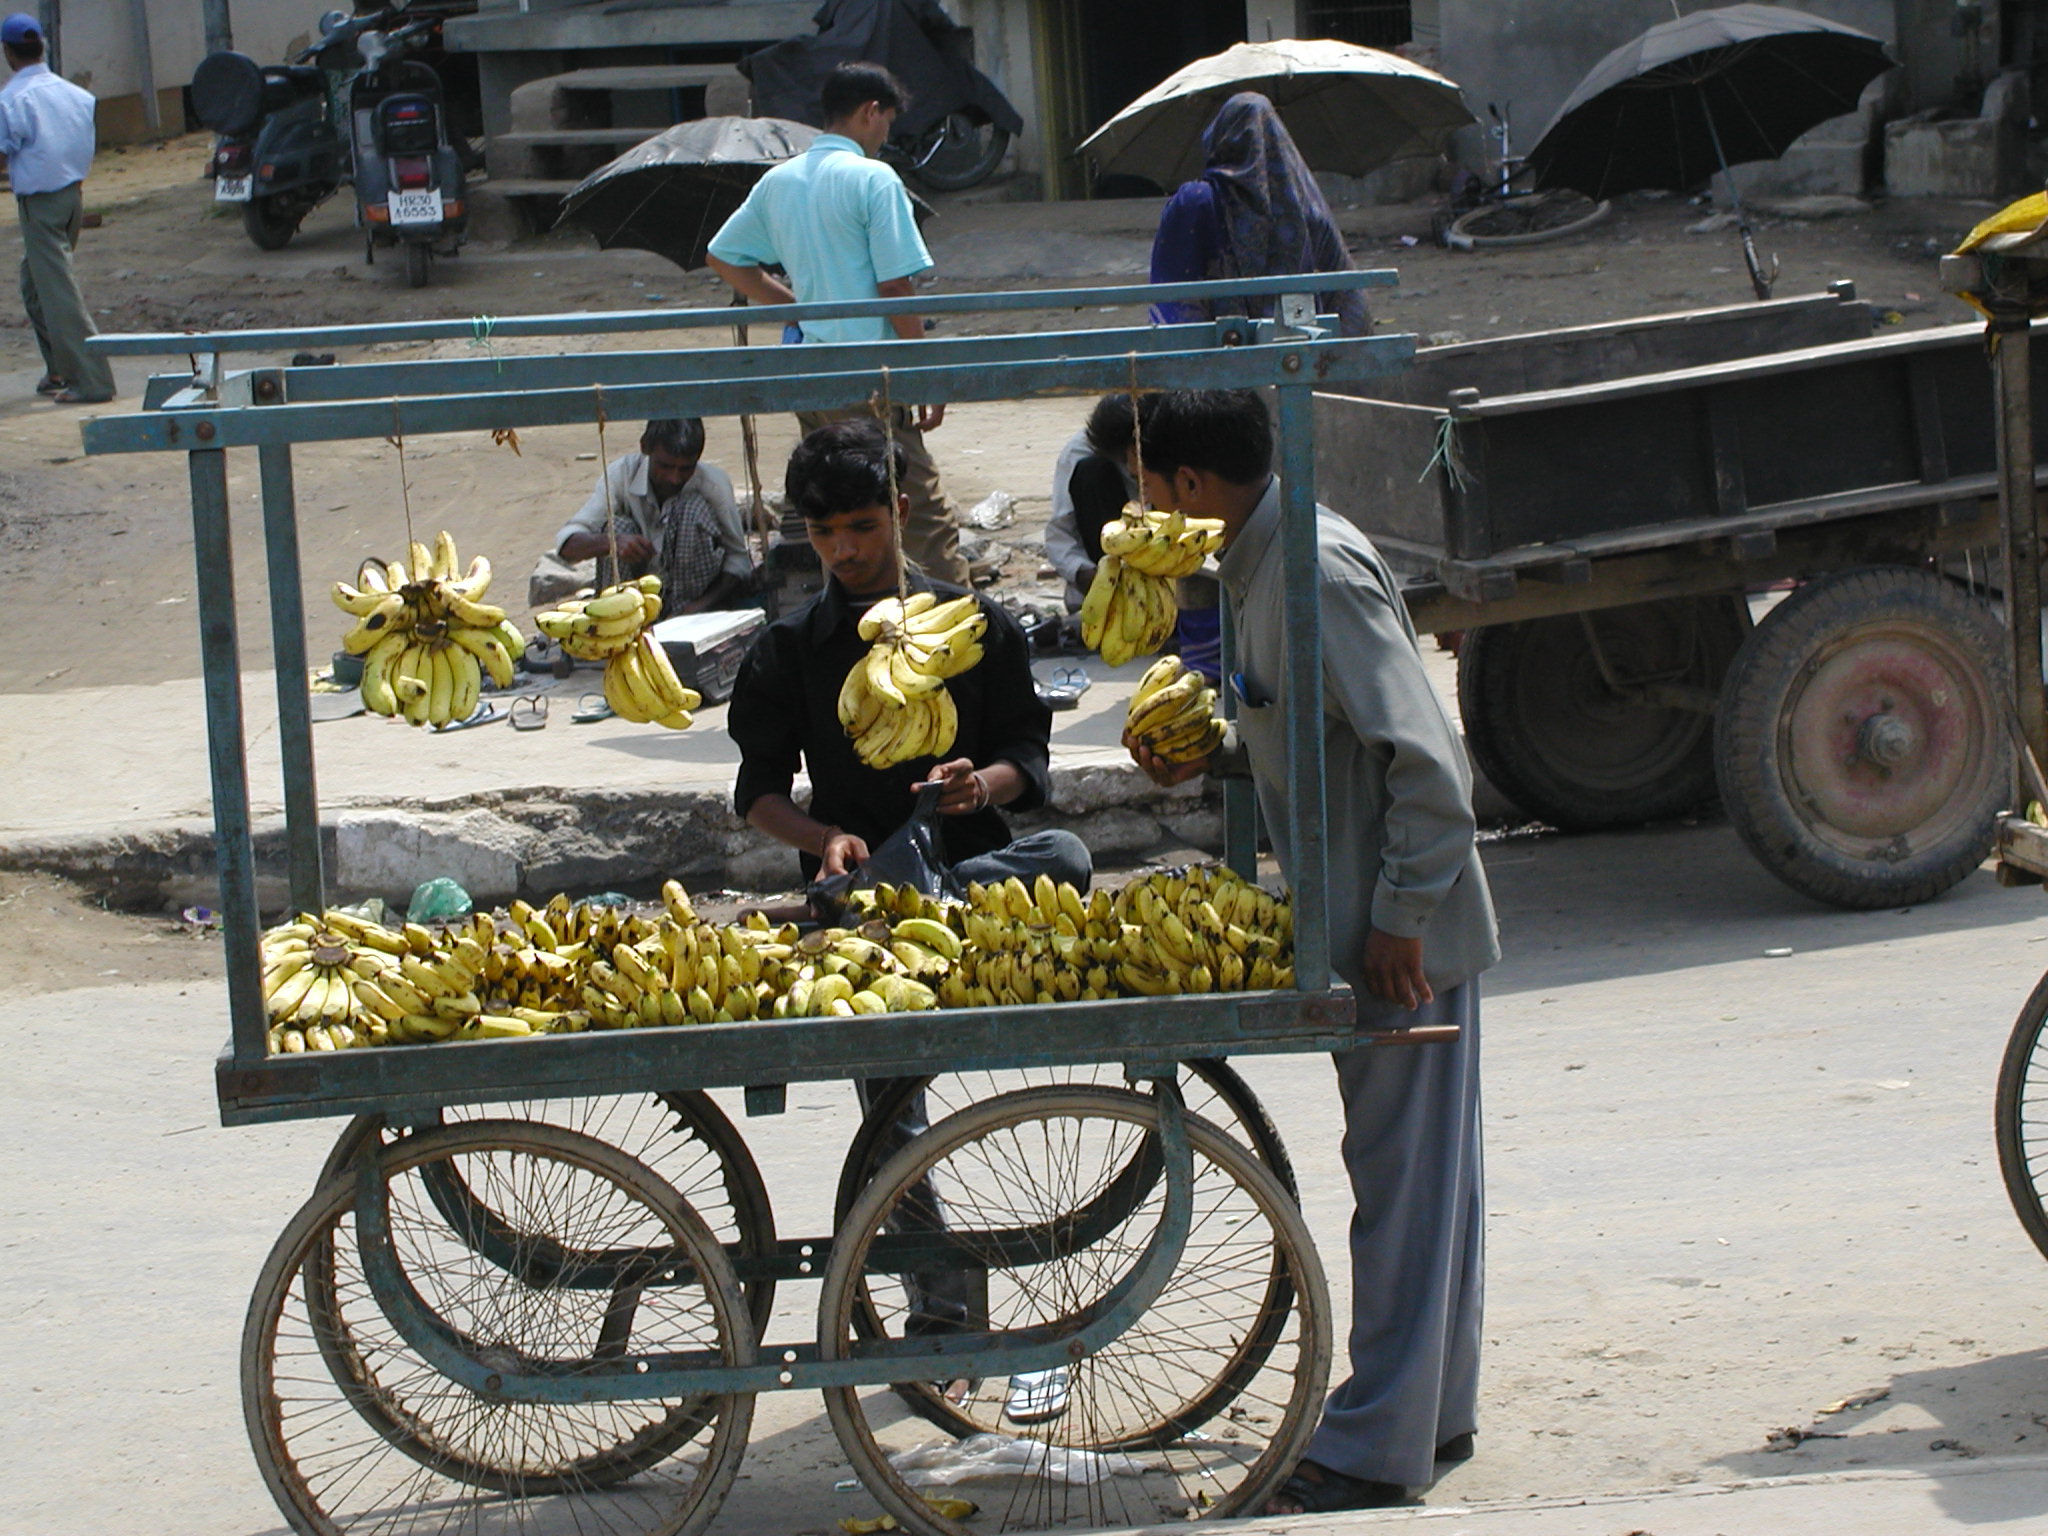 A man selling bananas on the street from his cart 